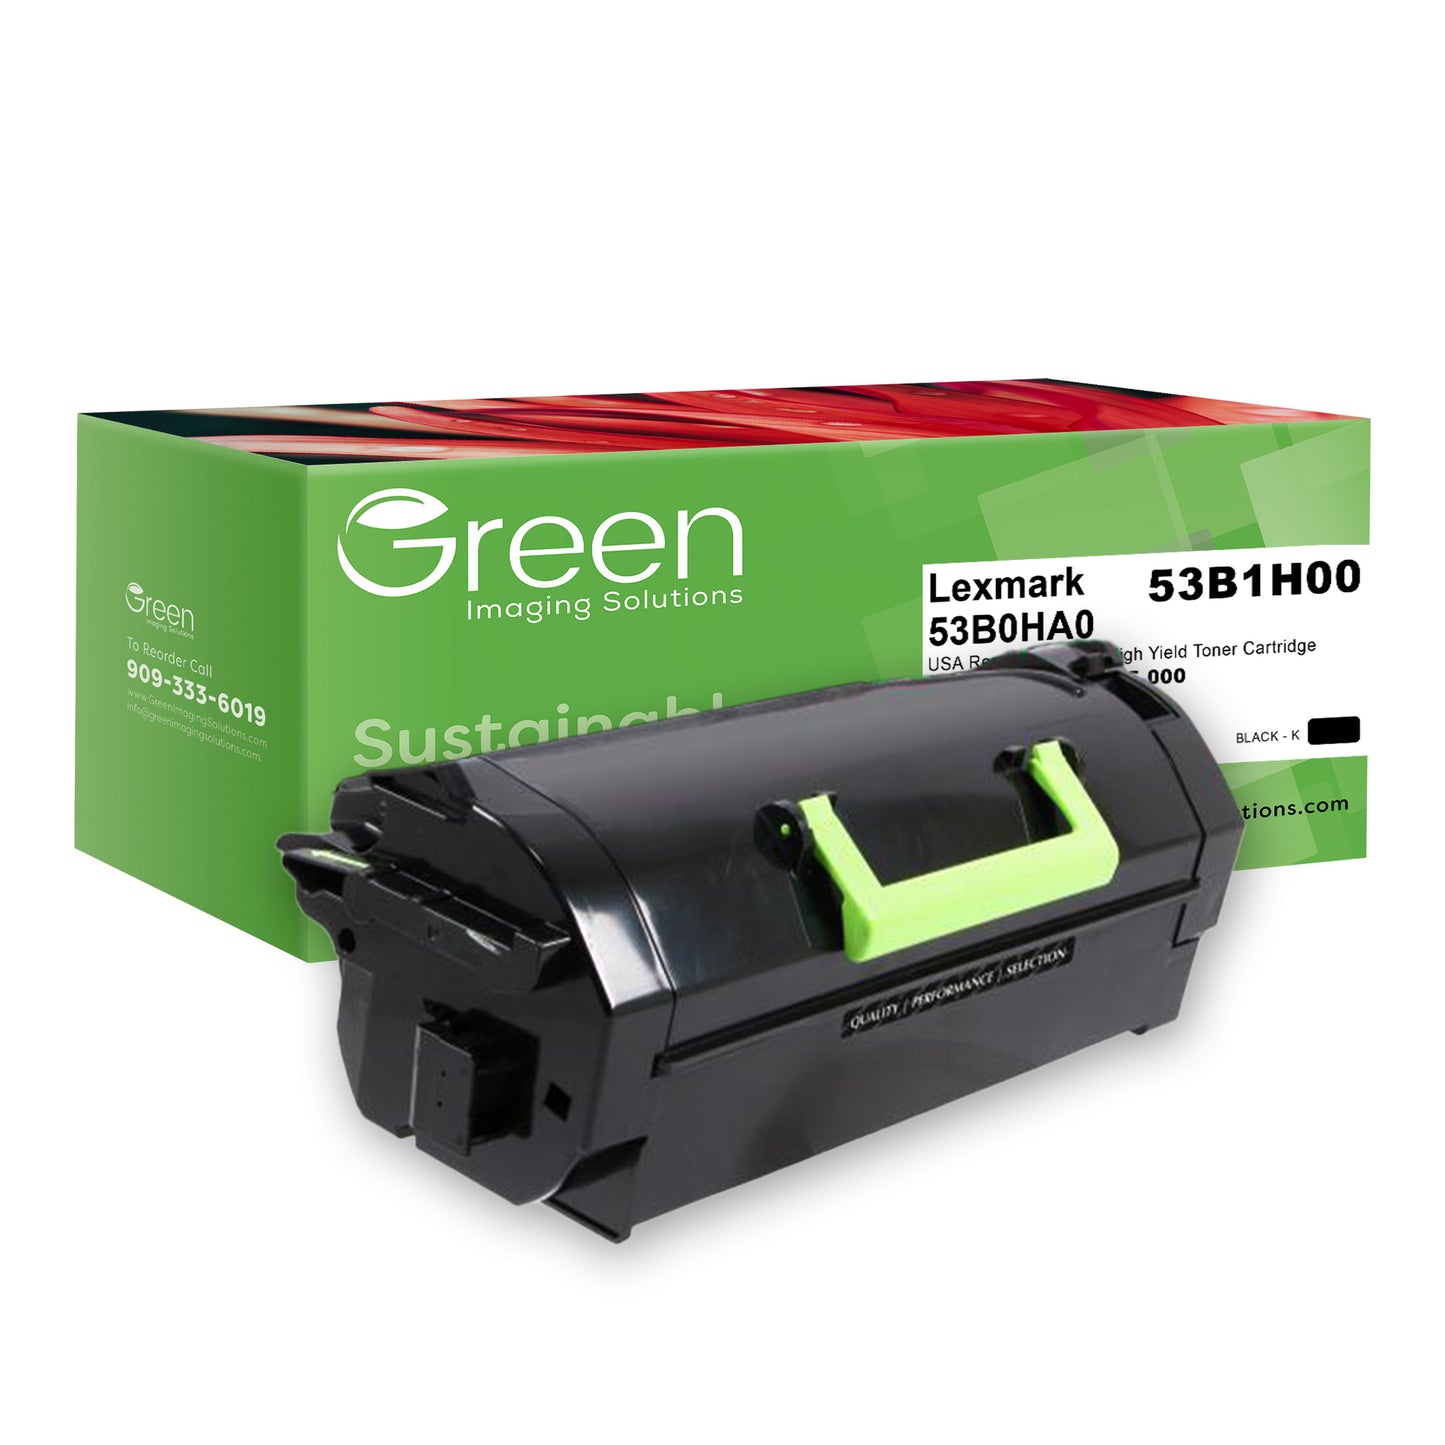 Green Imaging Solutions USA Remanufactured High Yield Toner Cartridge for Lexmark MS817